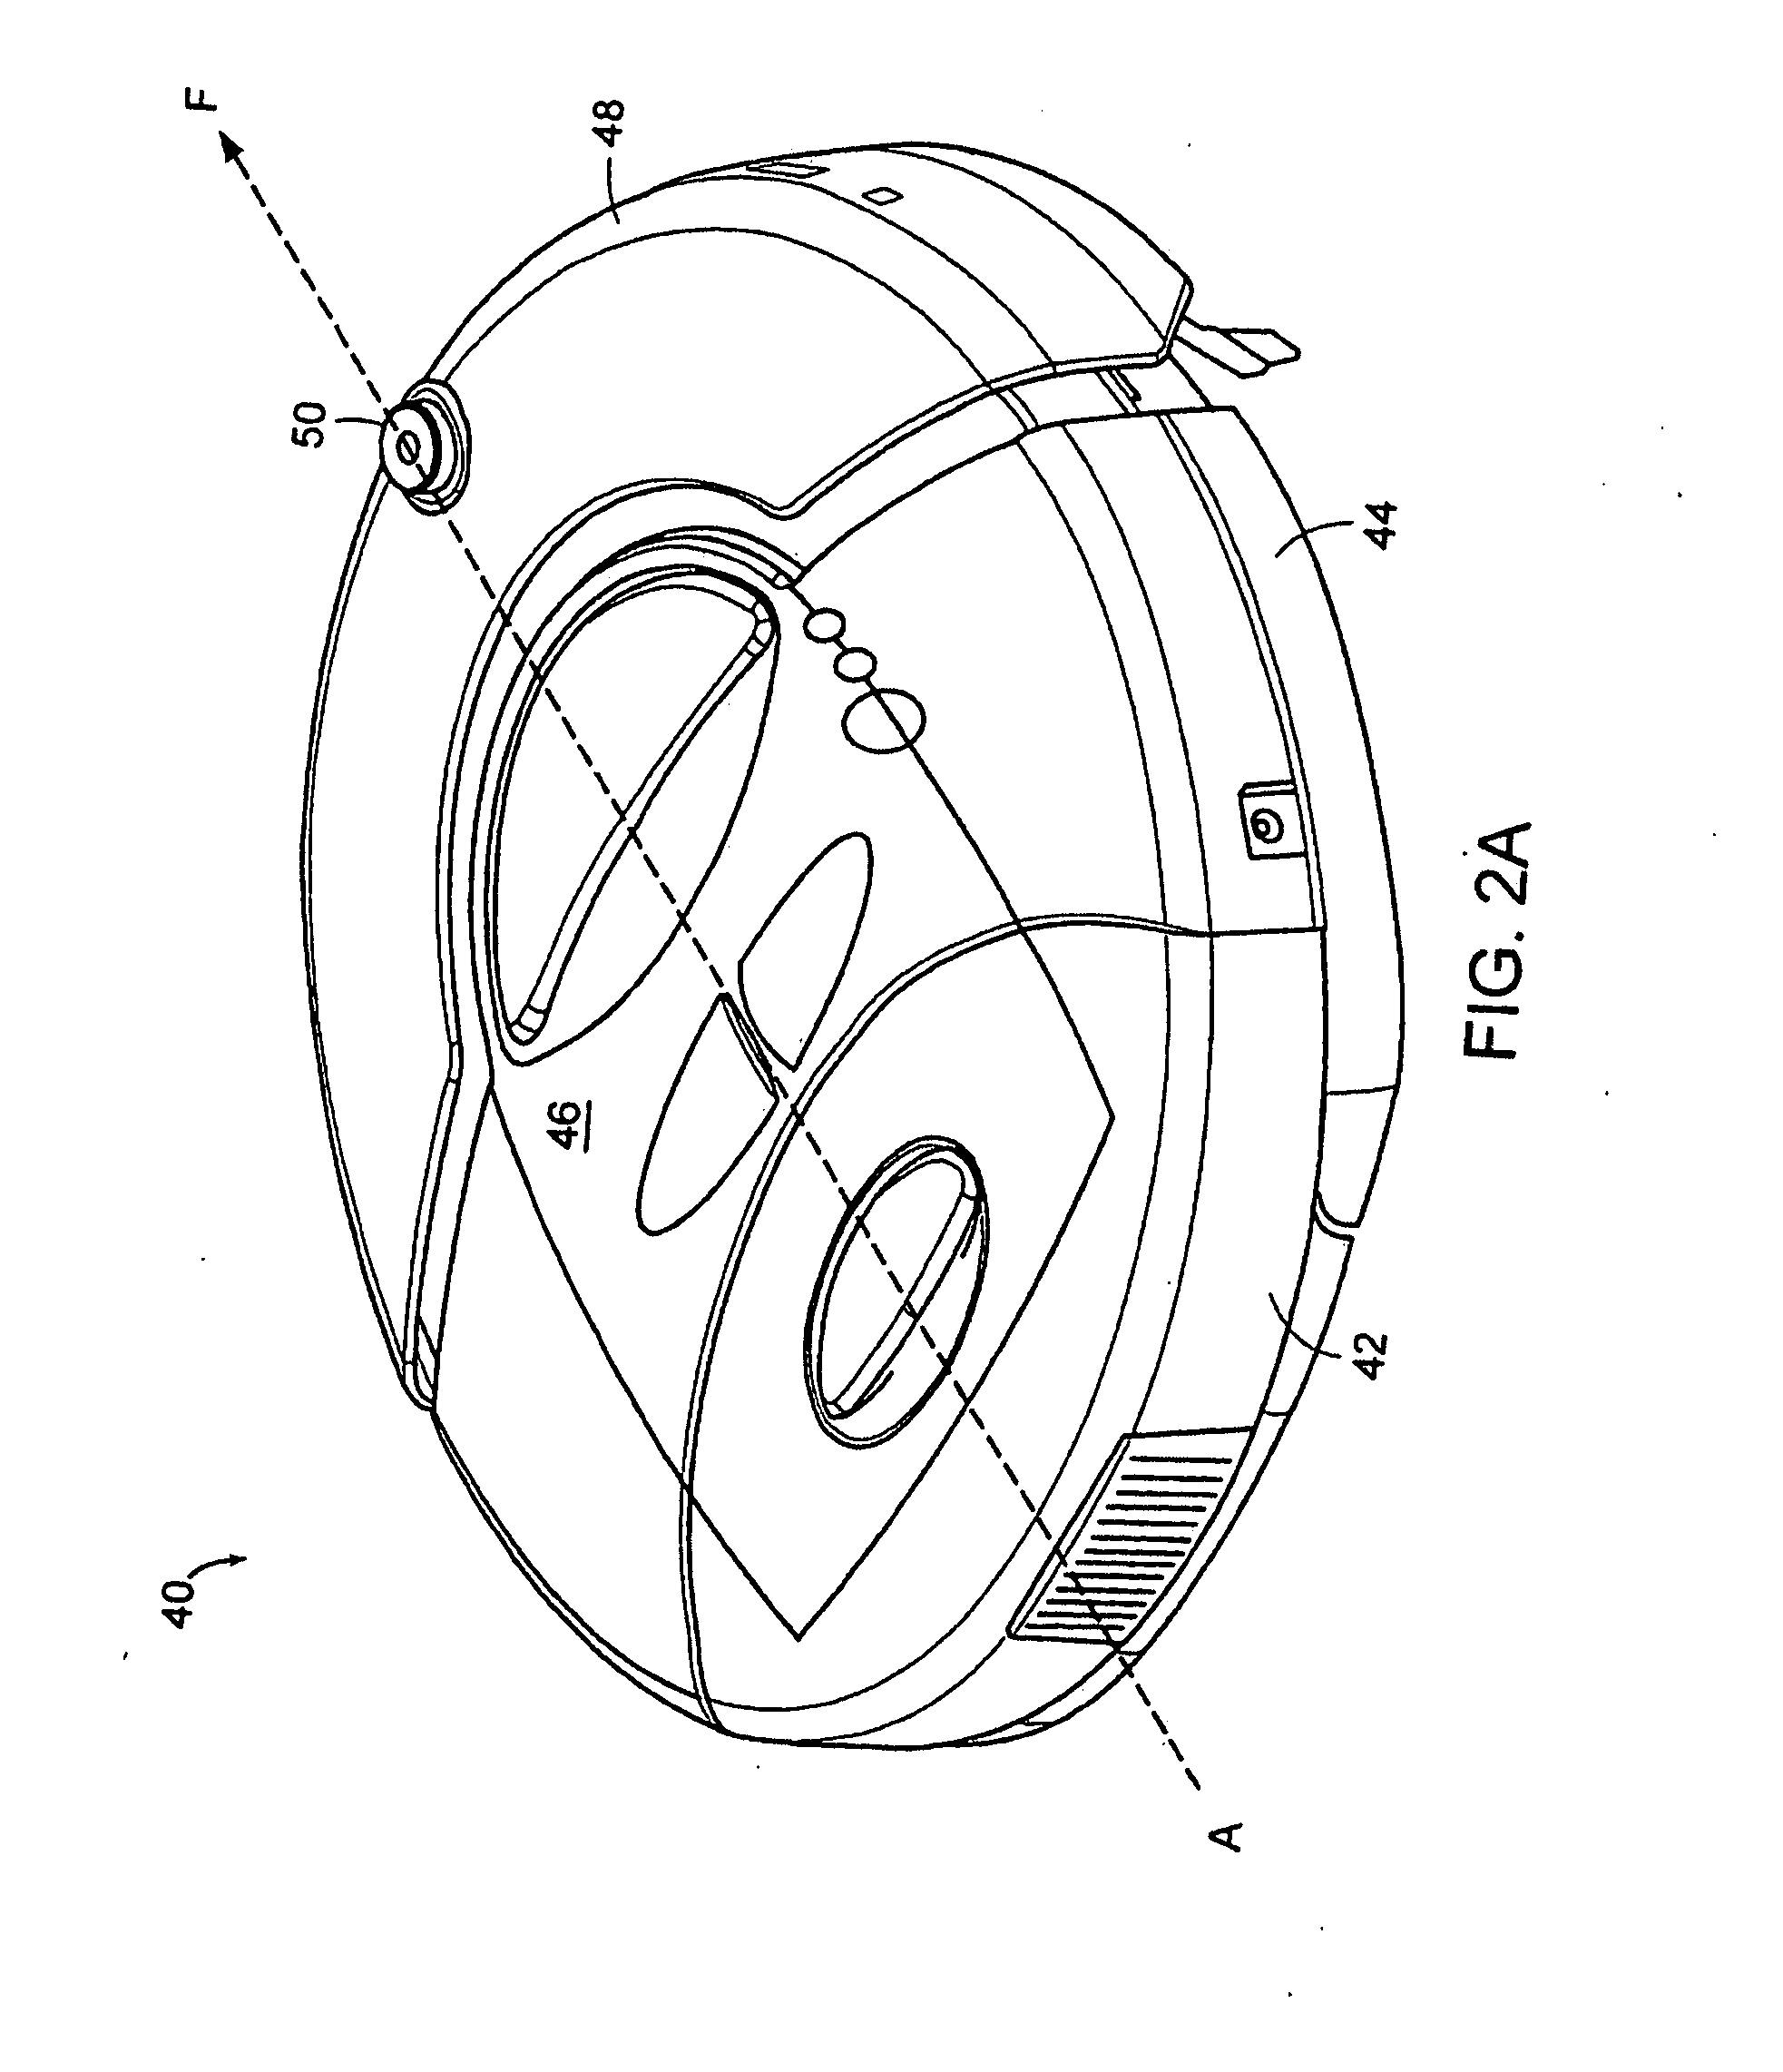 Autonomous Robot Auto-Docking and Energy Management Systems and Methods